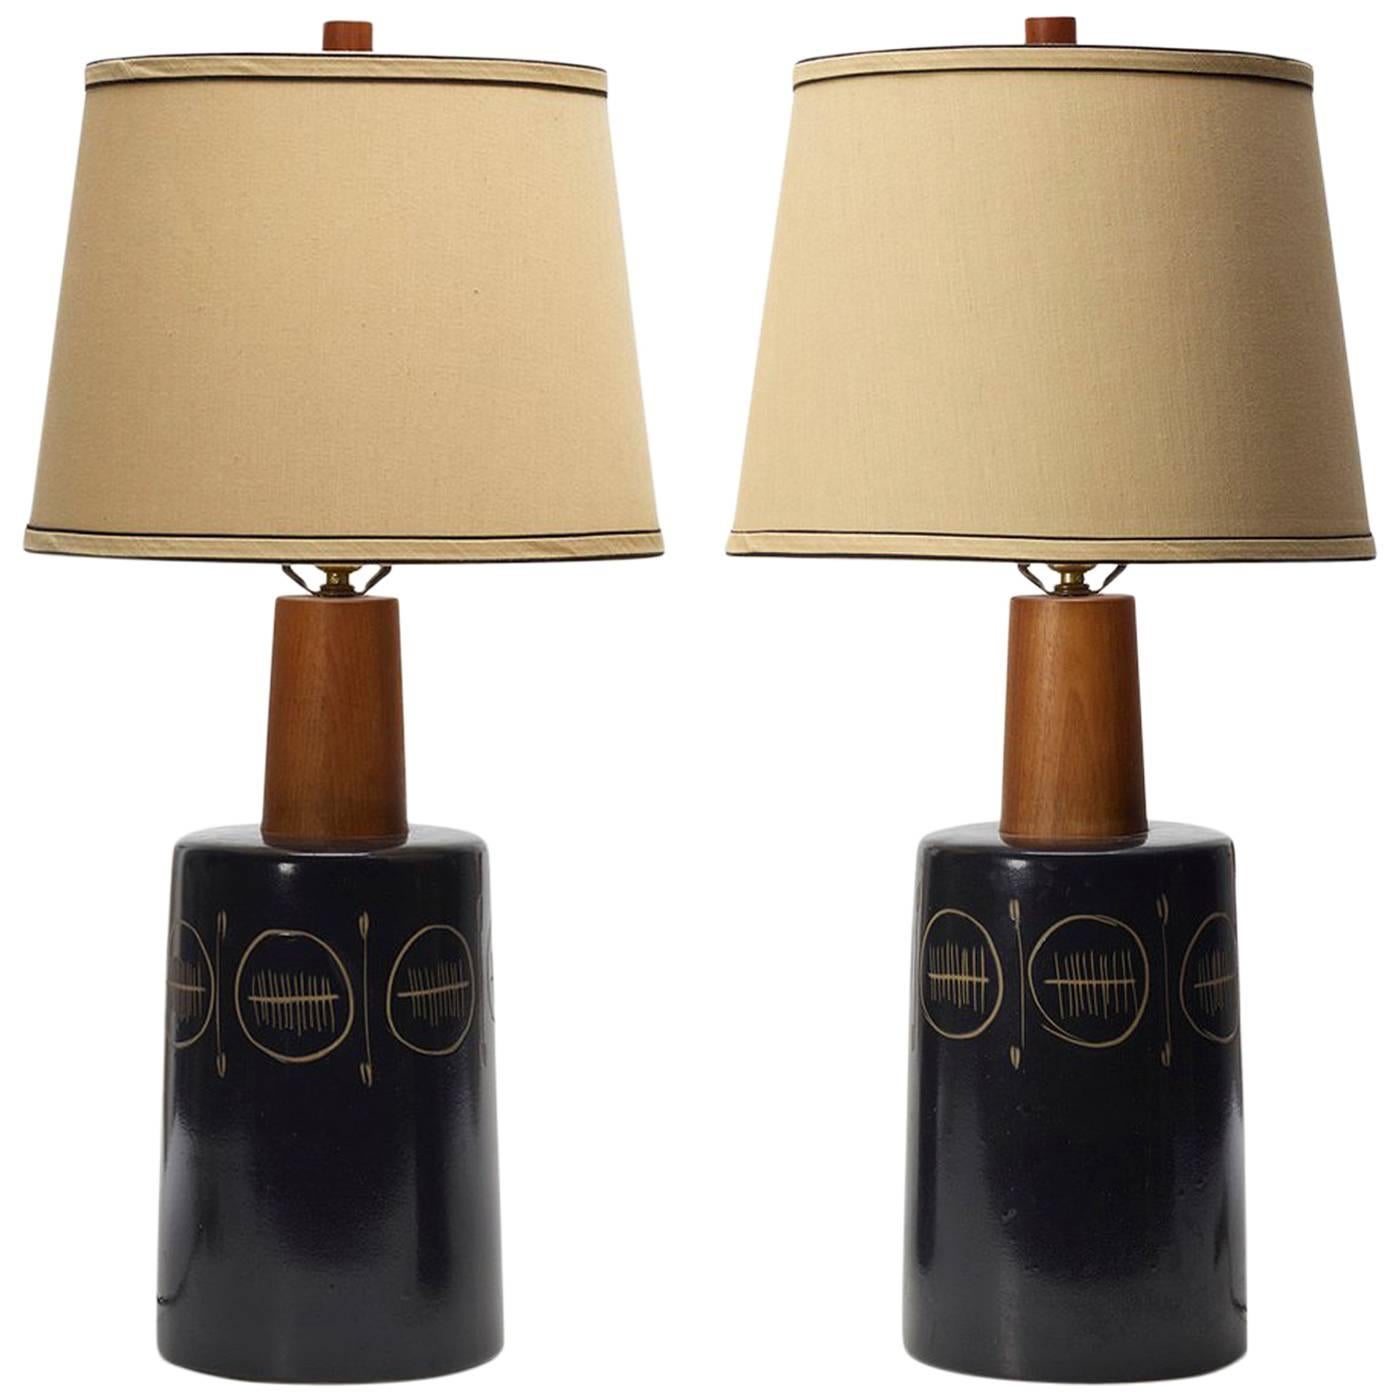 Pair of Table Lamps by Gordon Martz